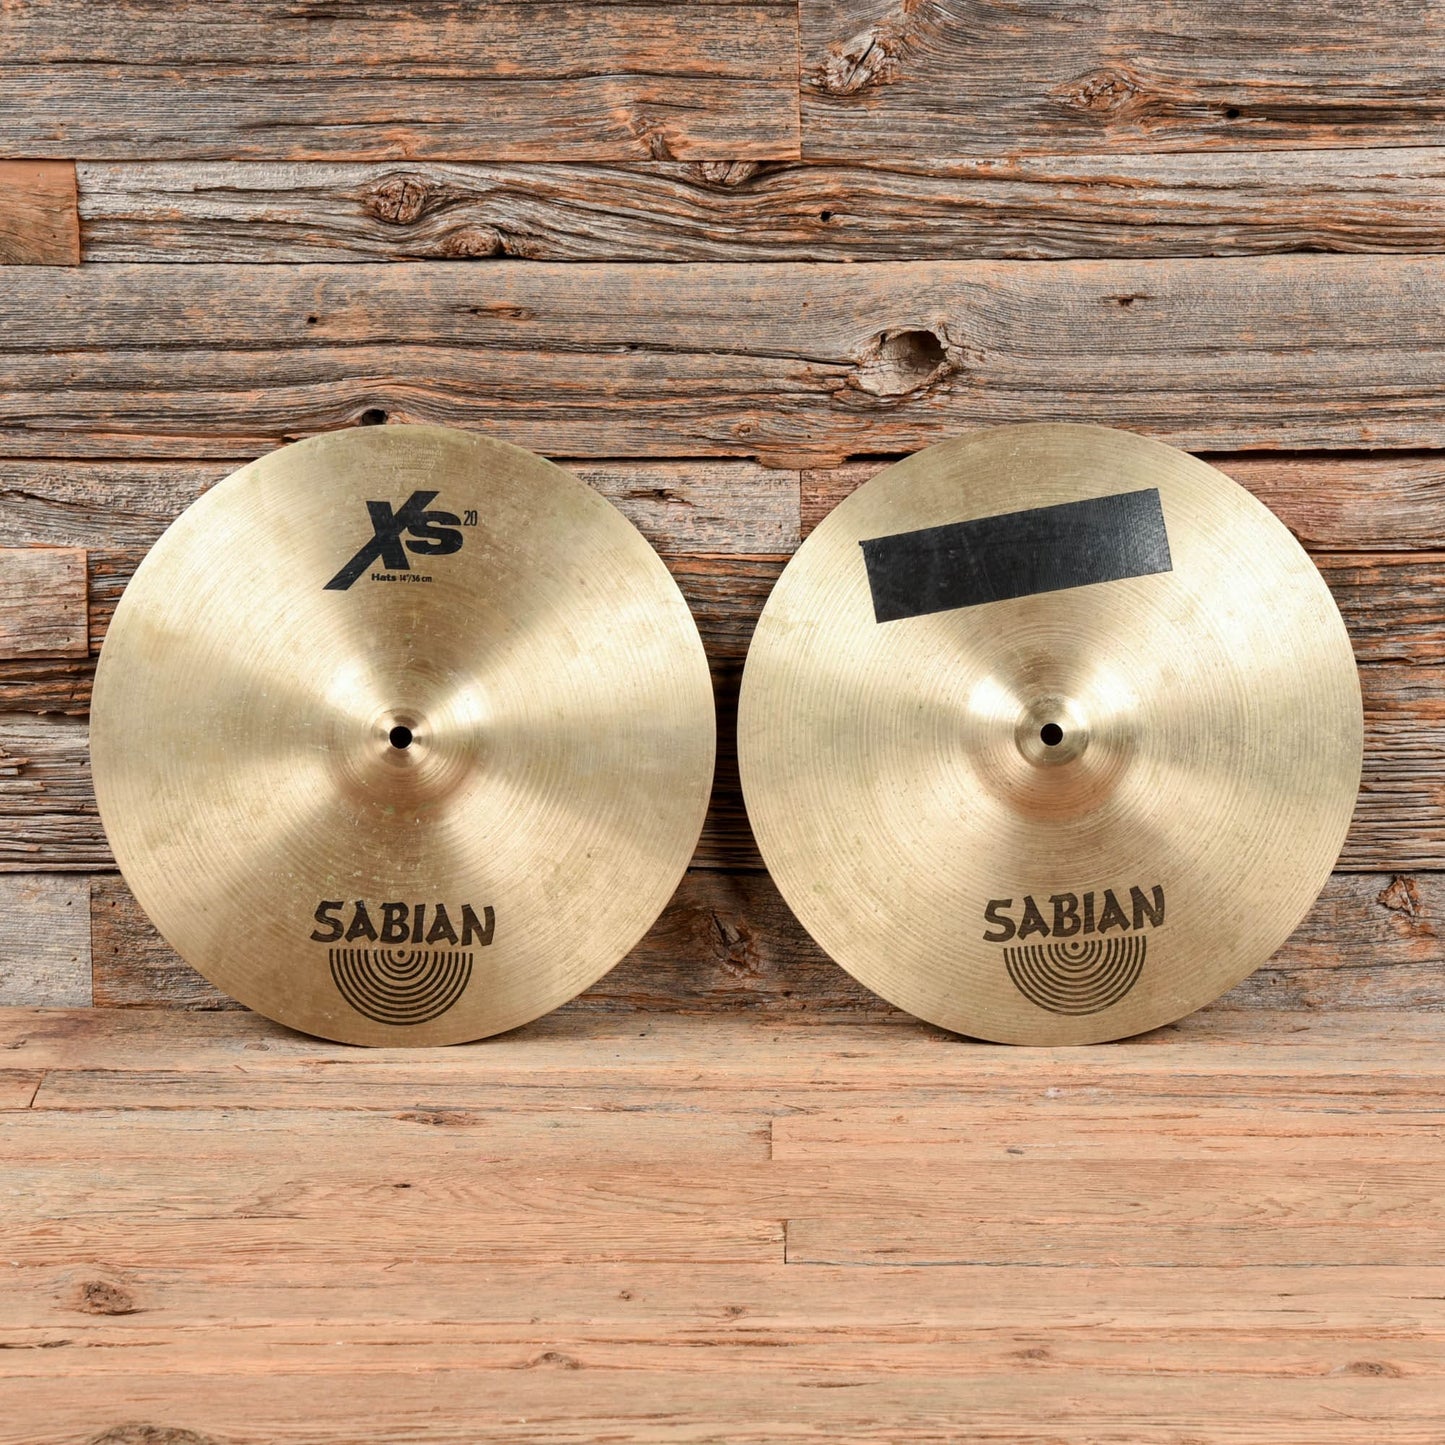 Sabian 14" XS20 Hi Hat Cymbals USED Drums and Percussion